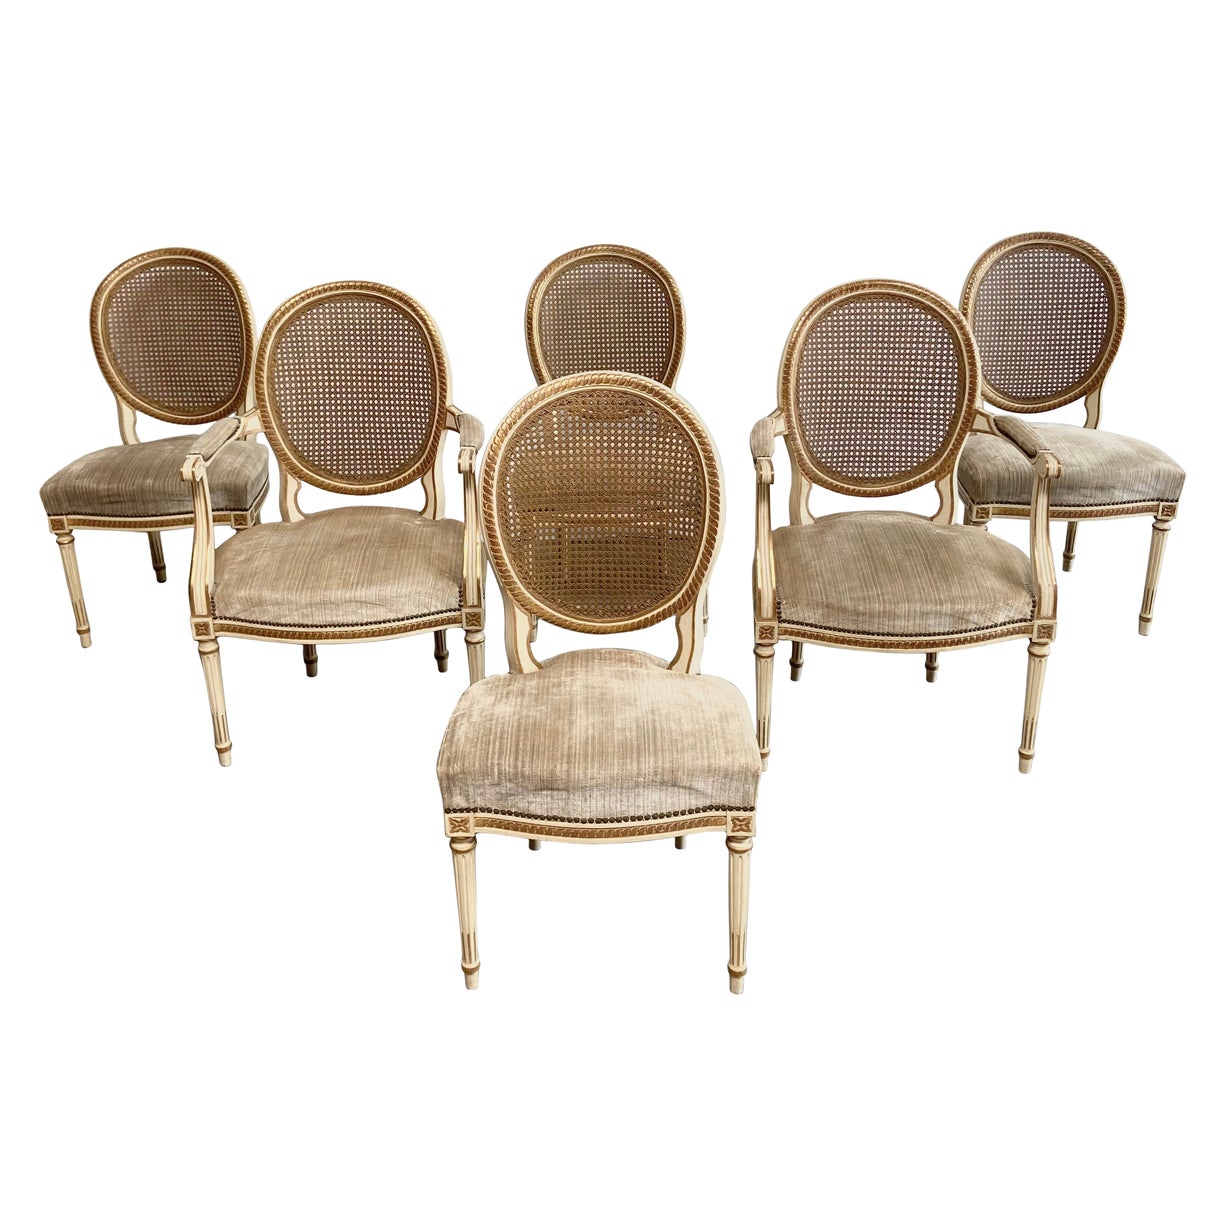 Set of 6 Antique French Style Cane Back Dining Chairs